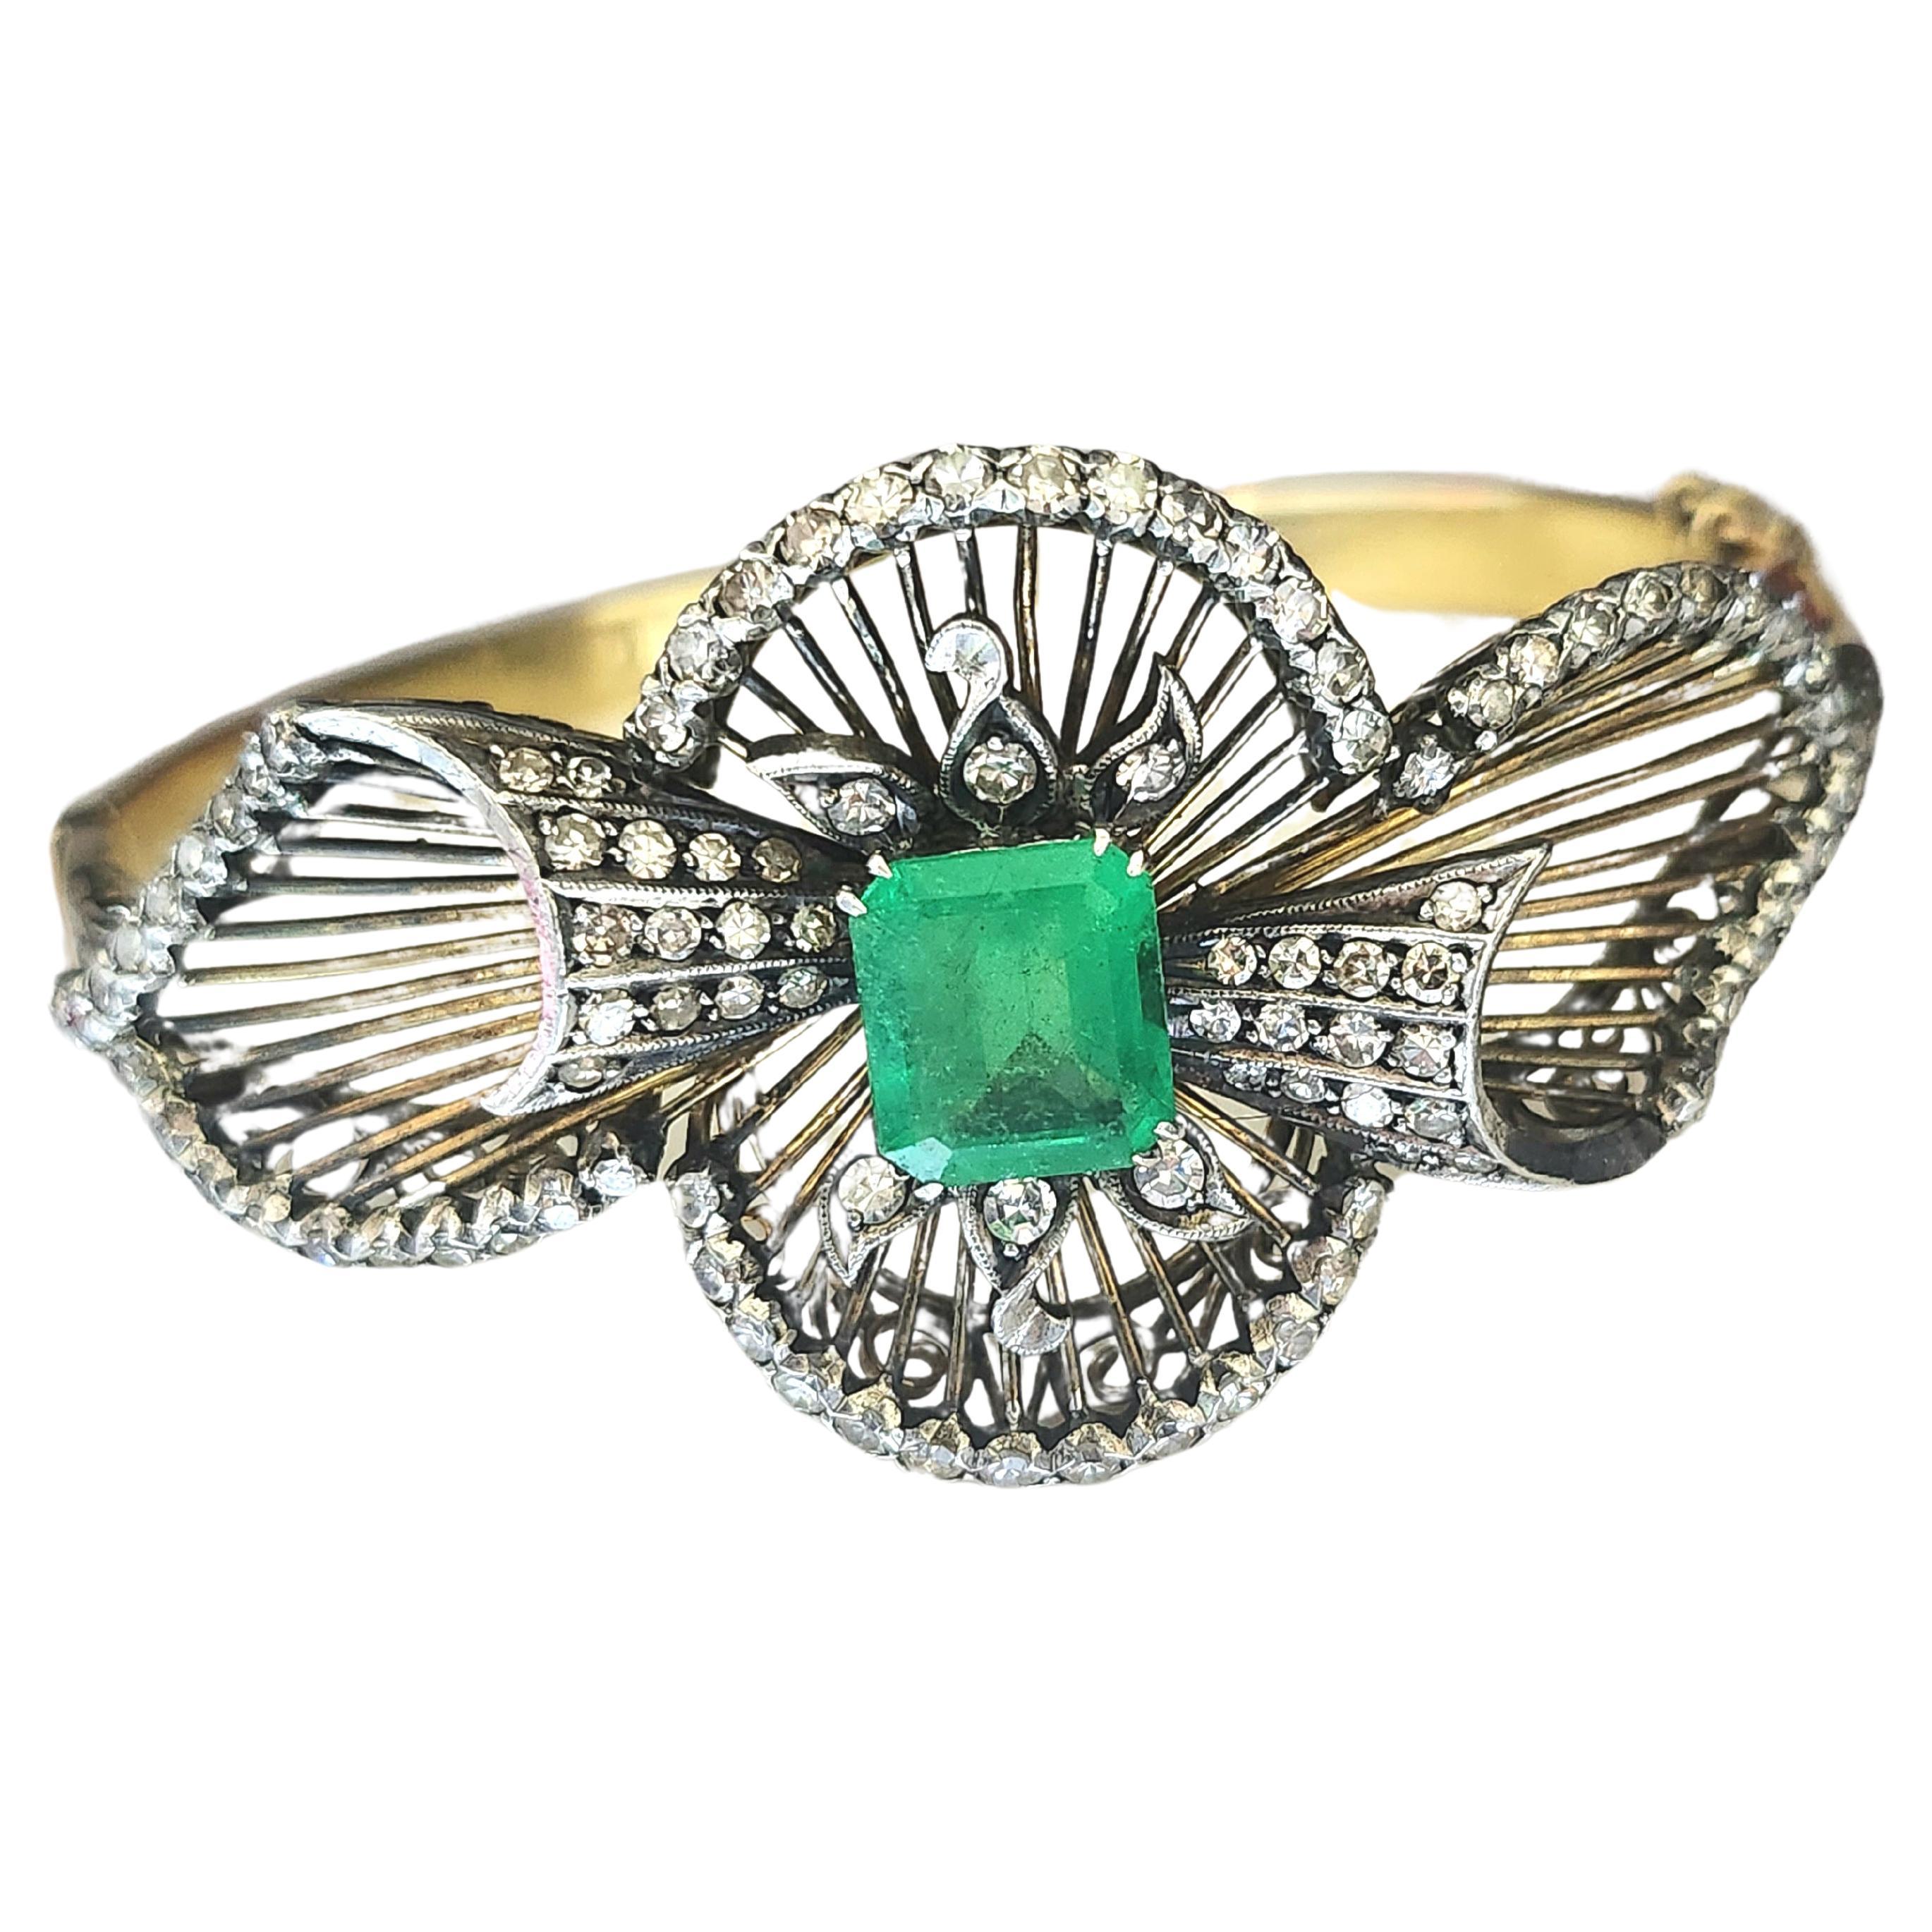 Antique bangle bracelet made in europe 1850s in an unuswal ribbon designe with detailed workmanship centered with natural green emerald 9.20mm×8mm estimate weight 3 carats flanked with old cut diamonds in open work style braclete head diameter